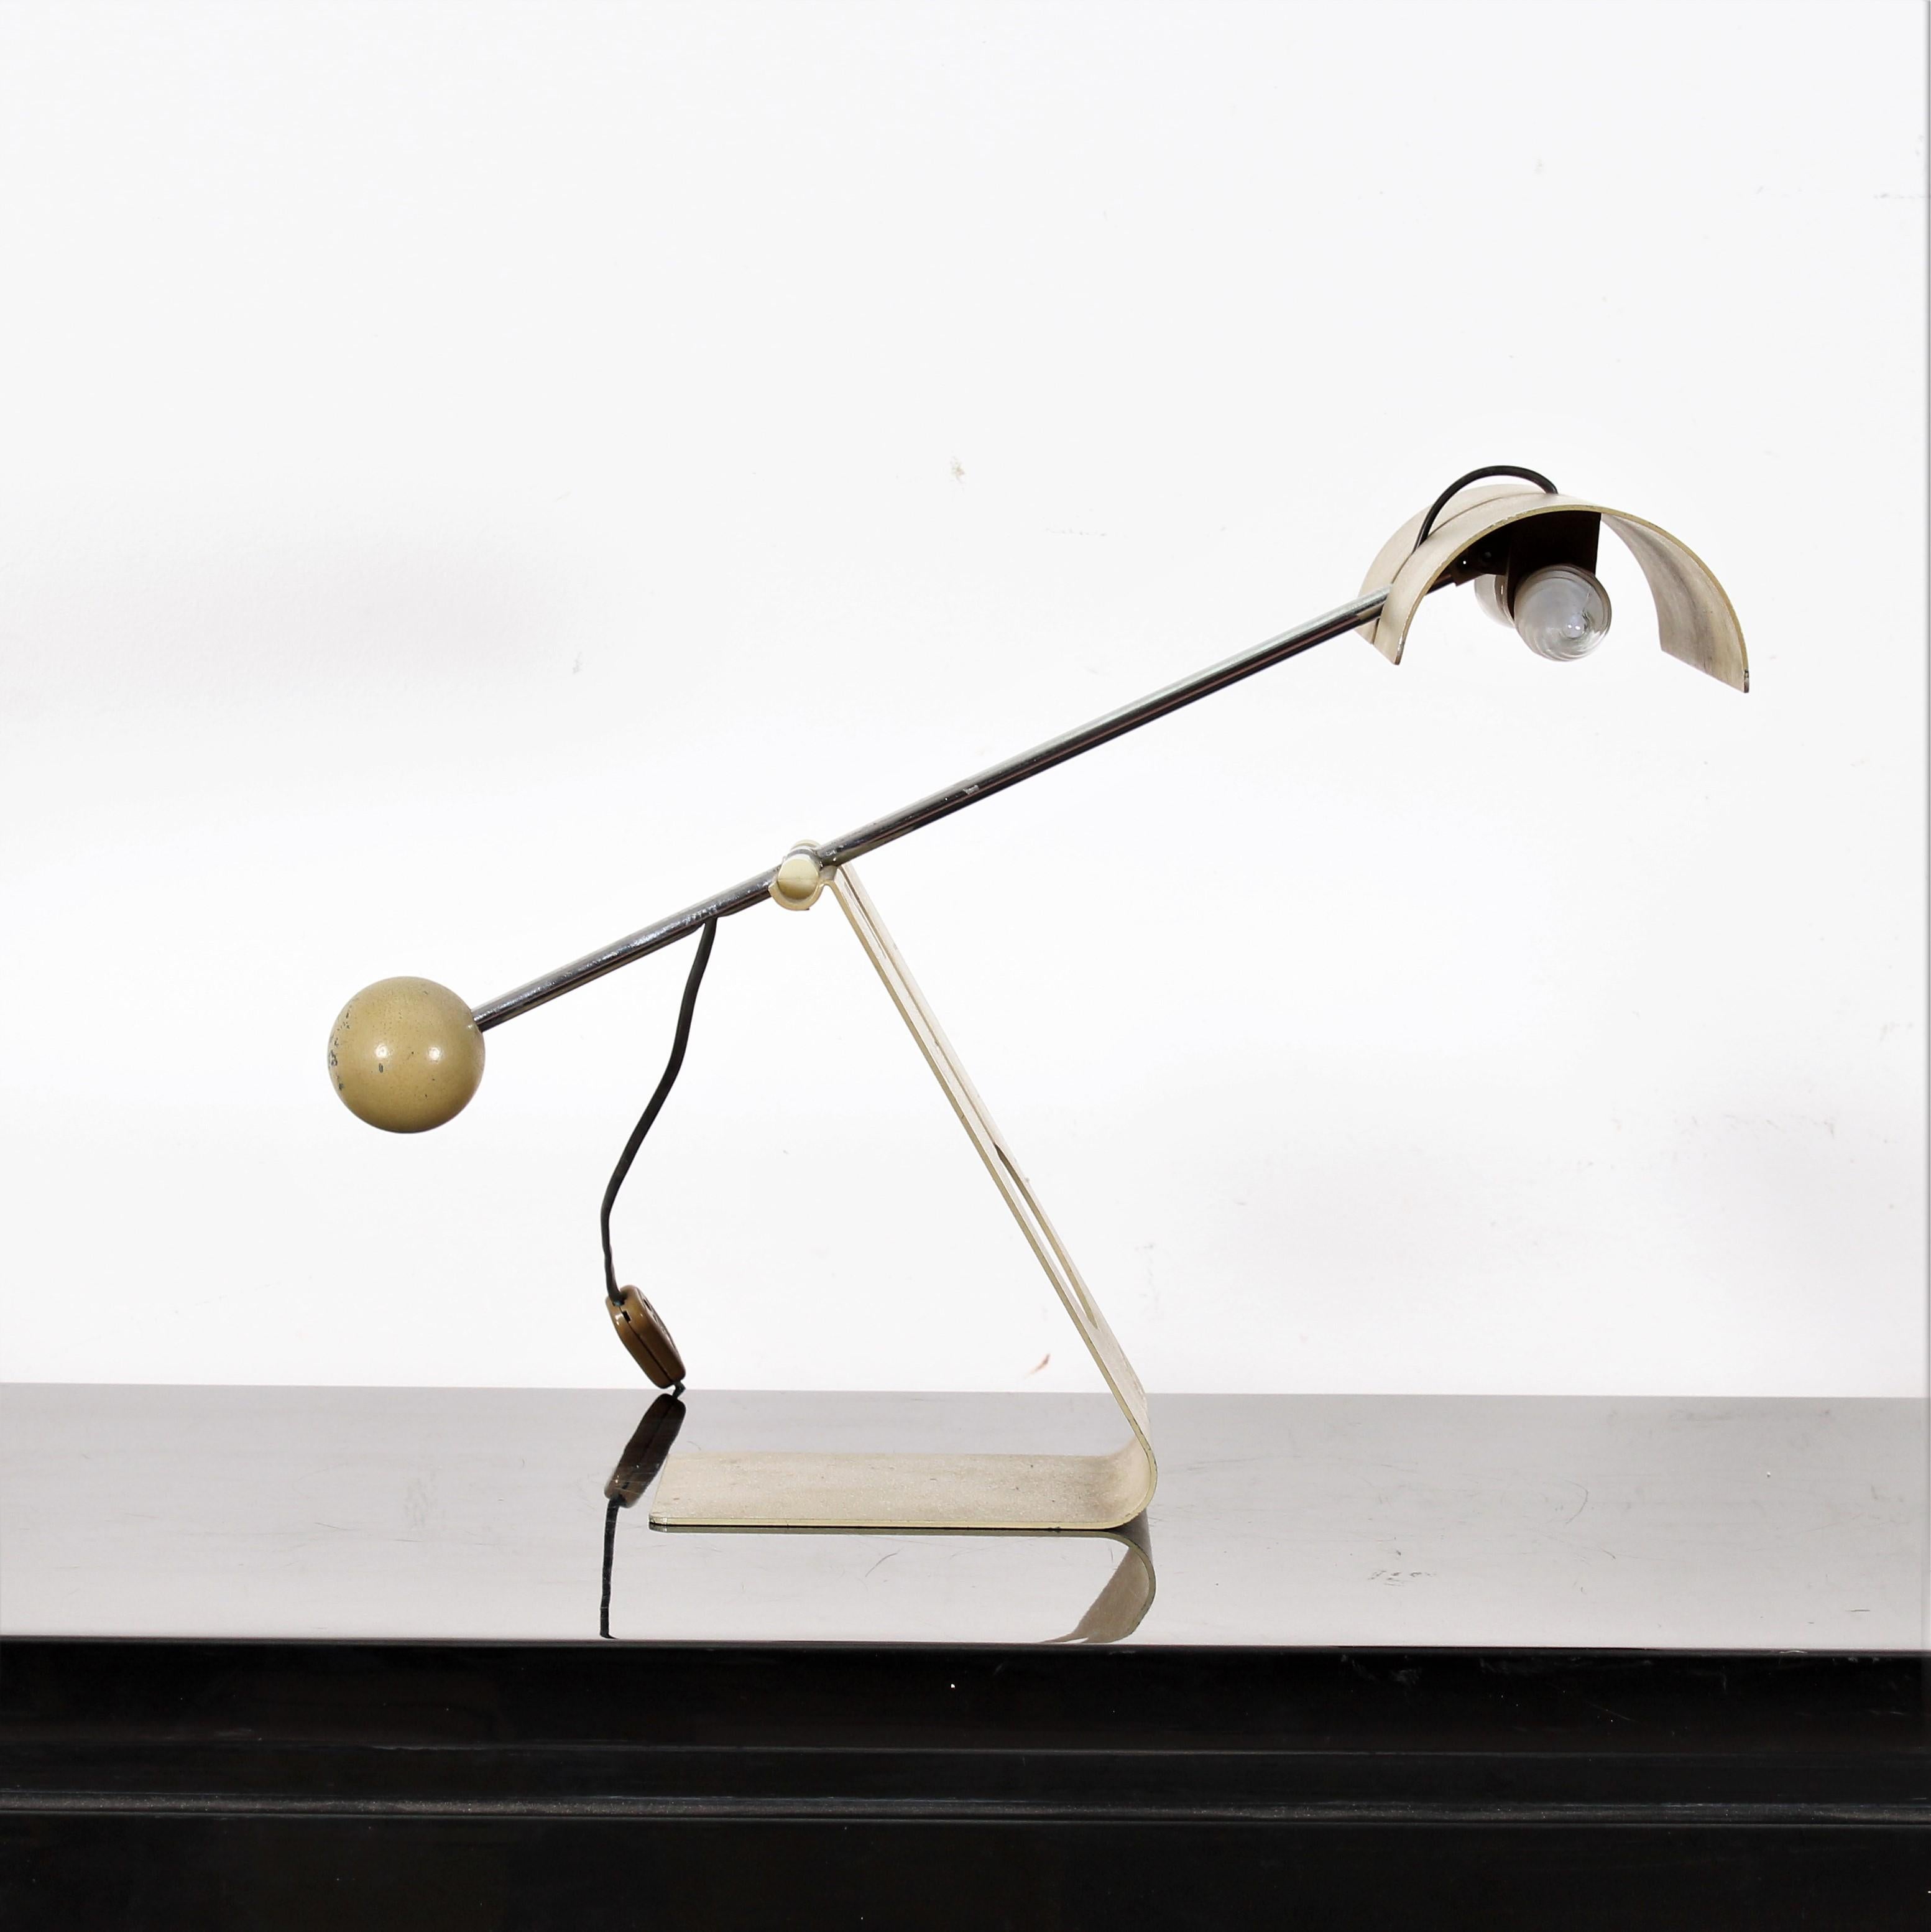 This metal table lamp is designed by Mauro Martini for Fratelli Martini, in Italy, 1960s.
The name 